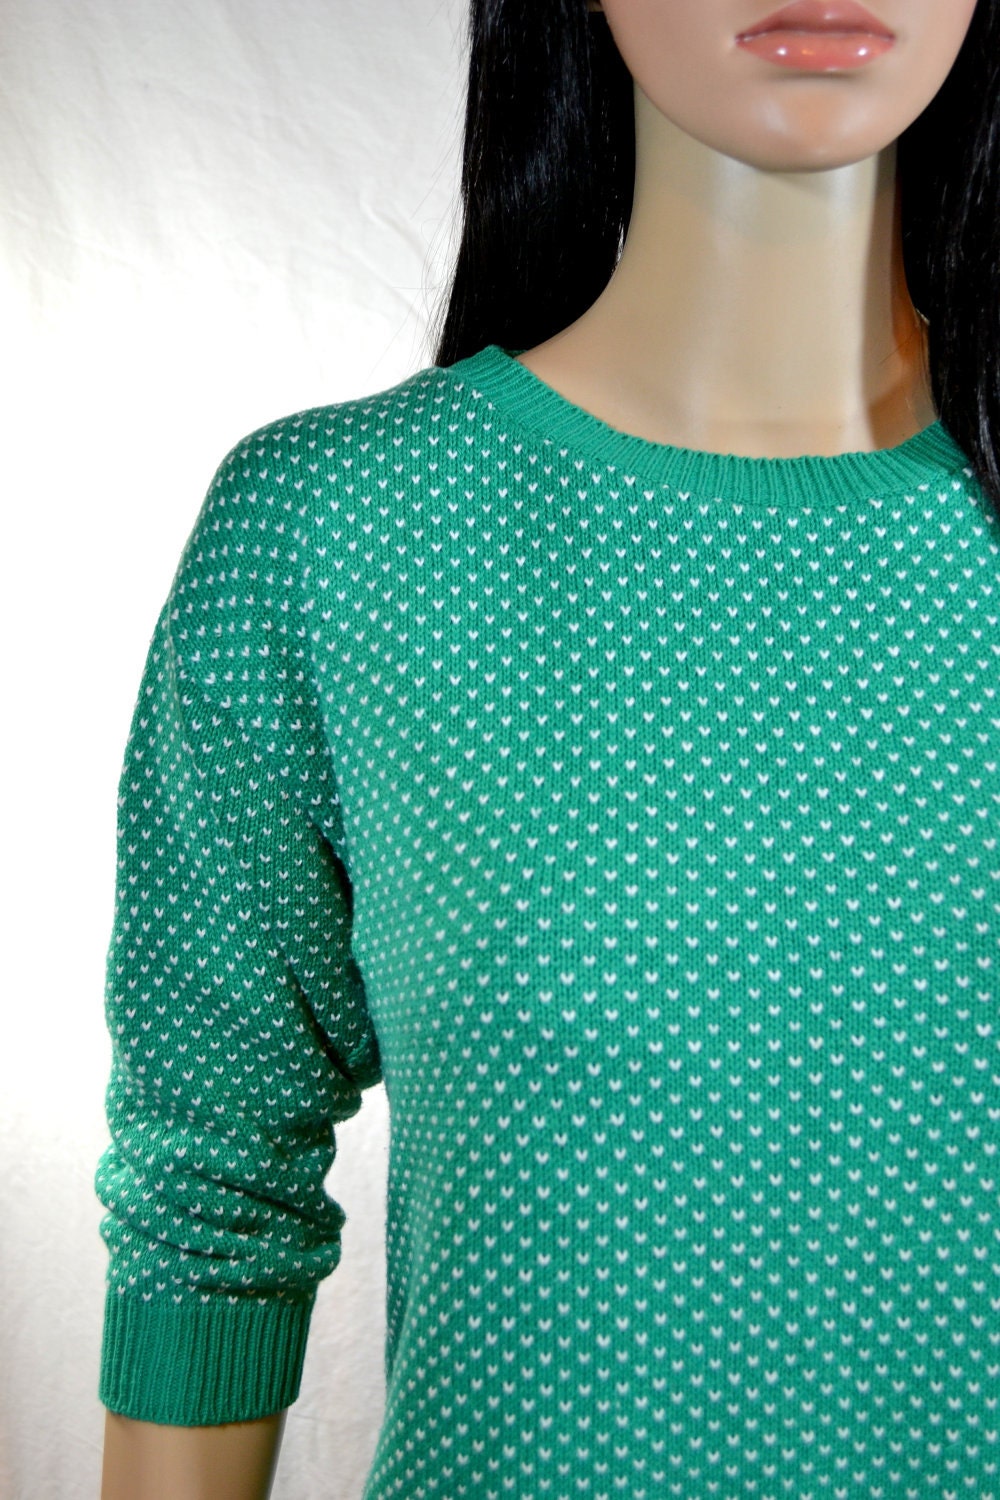 1980's SLOUCH SWEATER by R J Studio Made in USA size medium Green & White Heart Polkadot